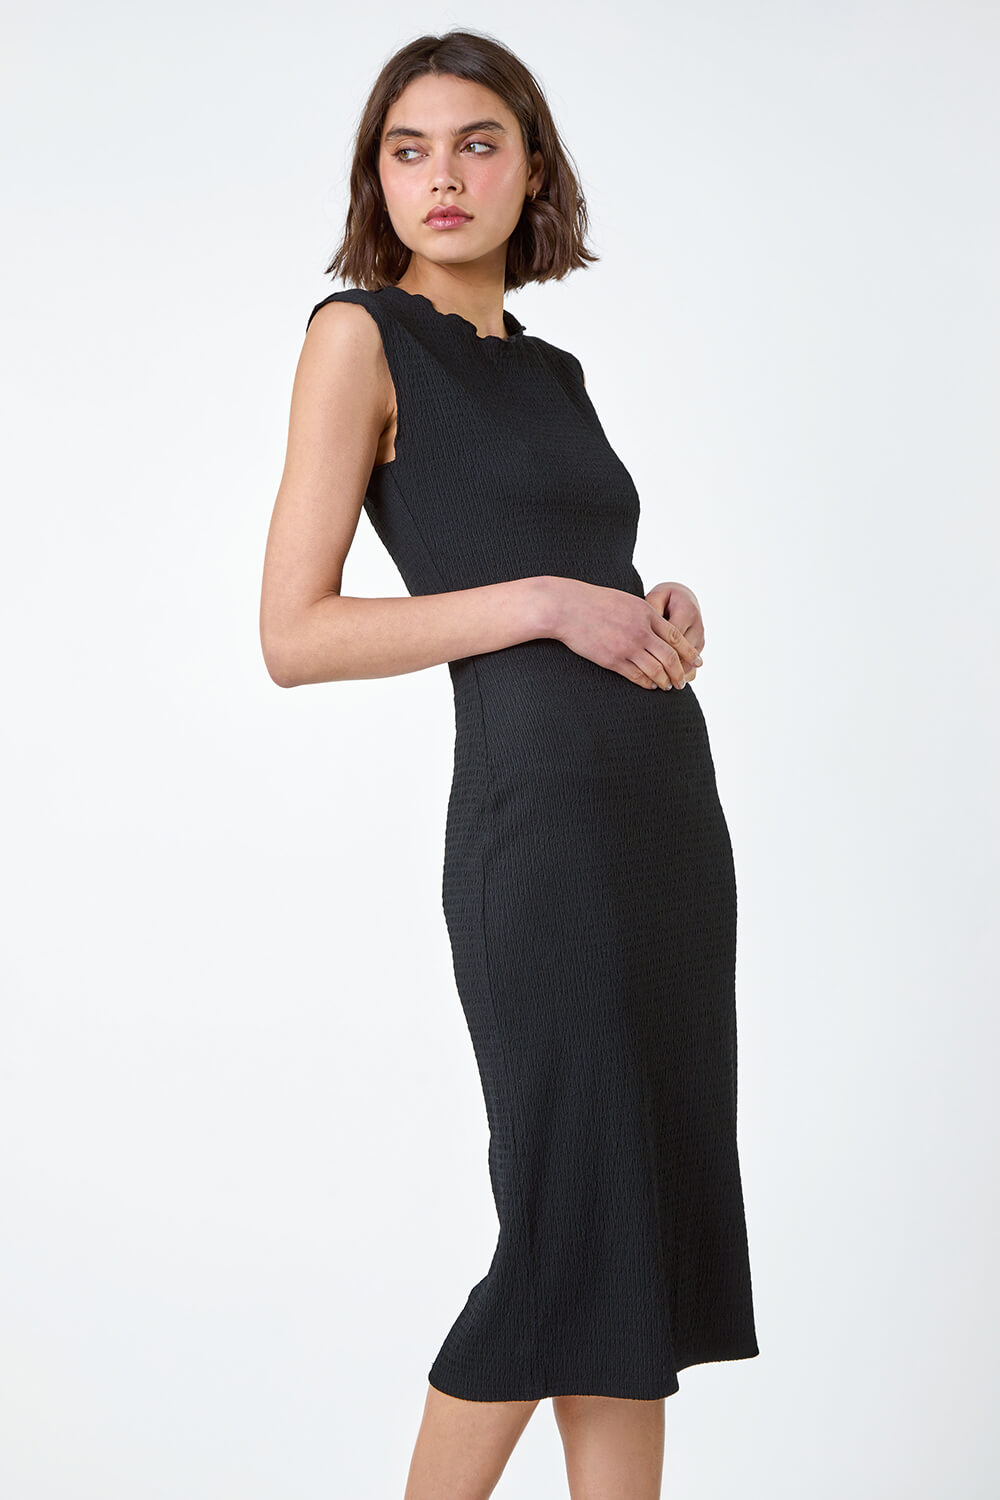 Black Textured Stretch Bodycon Dress, Image 2 of 5